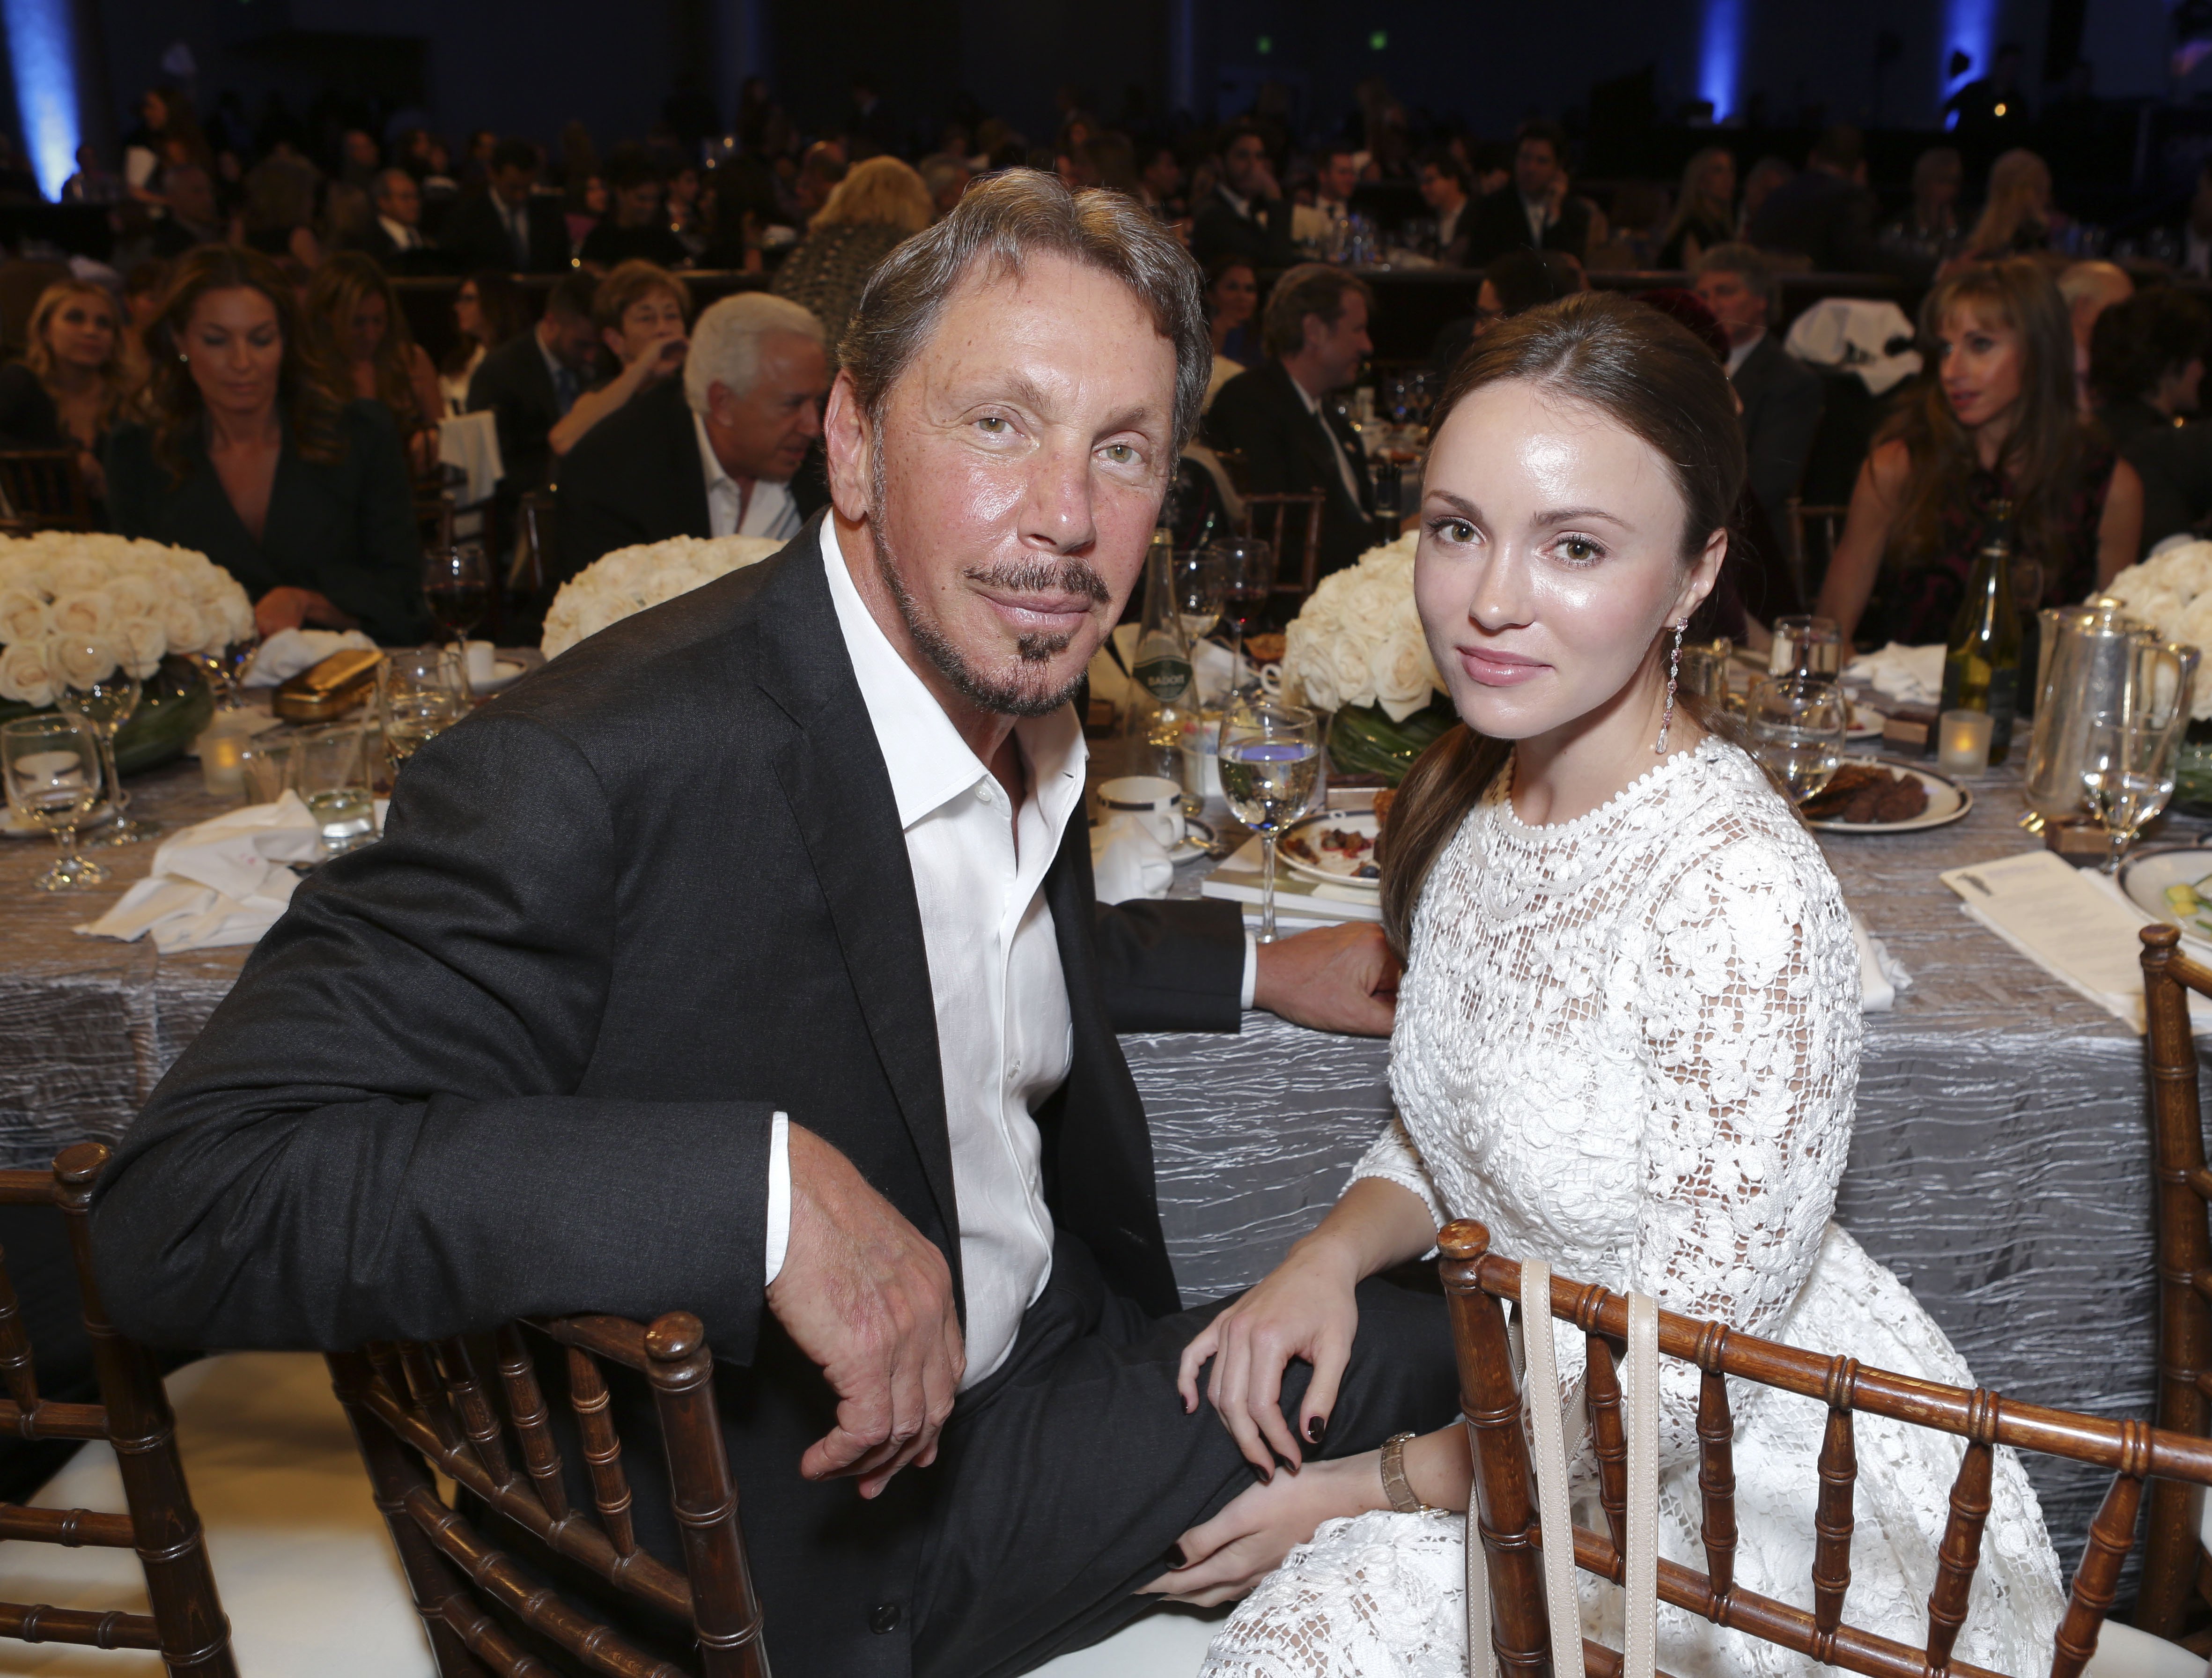 Larry Ellison and Nikita Kahn attend the Friends Of The Israel Defense Forces 2014 Western Region Gala at The Beverly Hilton Hotel on November 6, 2014, in Beverly Hills, California. | Source: Getty Images